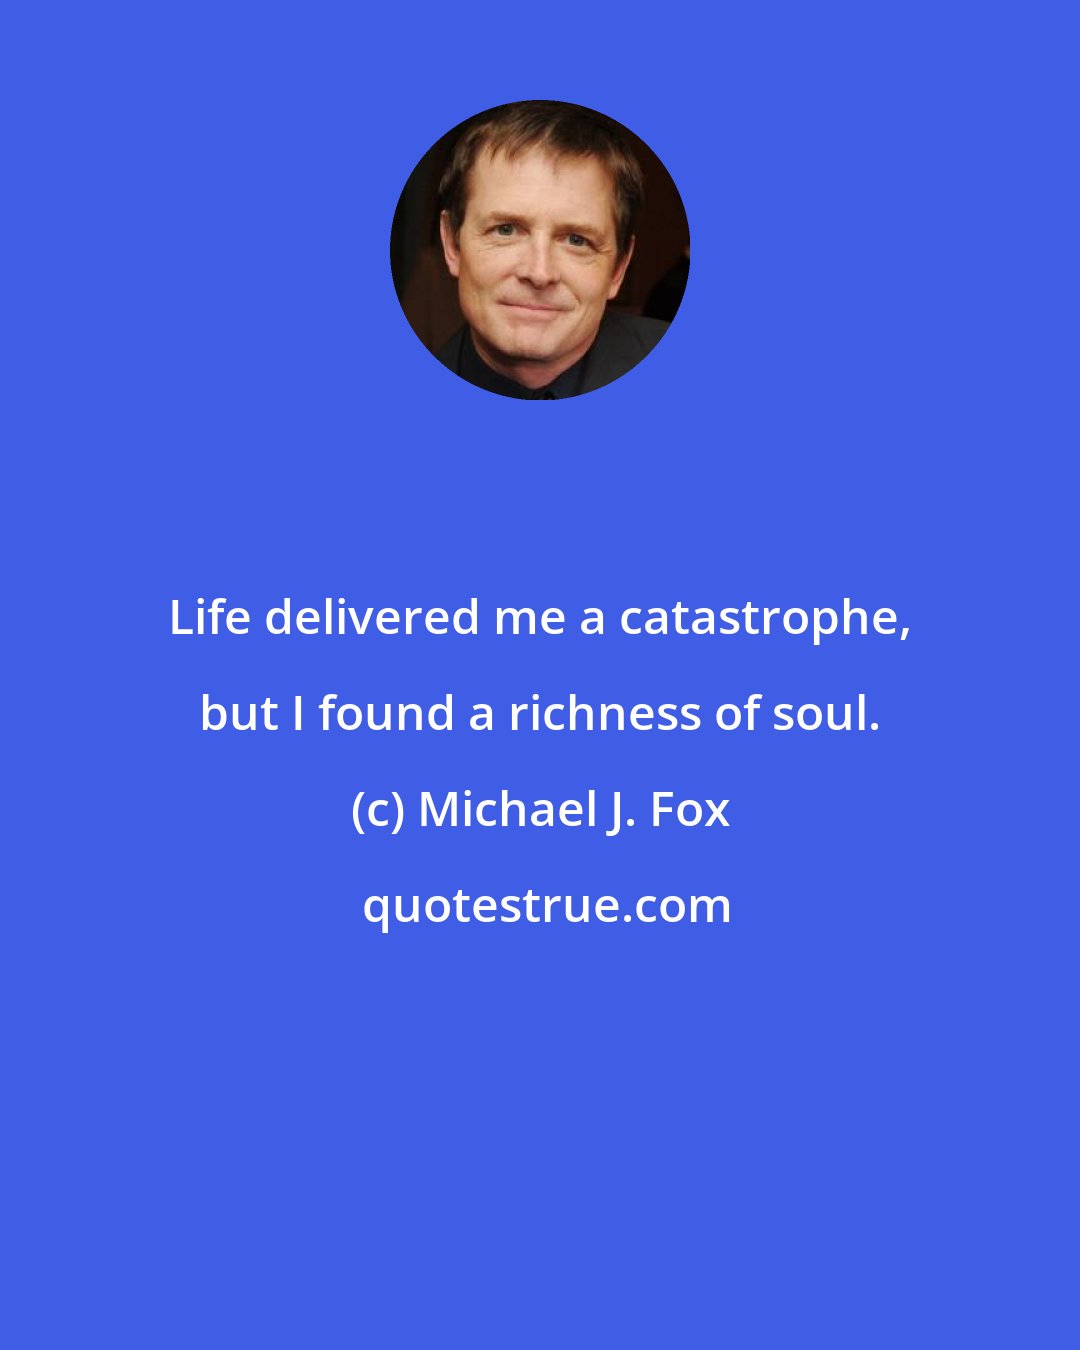 Michael J. Fox: Life delivered me a catastrophe, but I found a richness of soul.